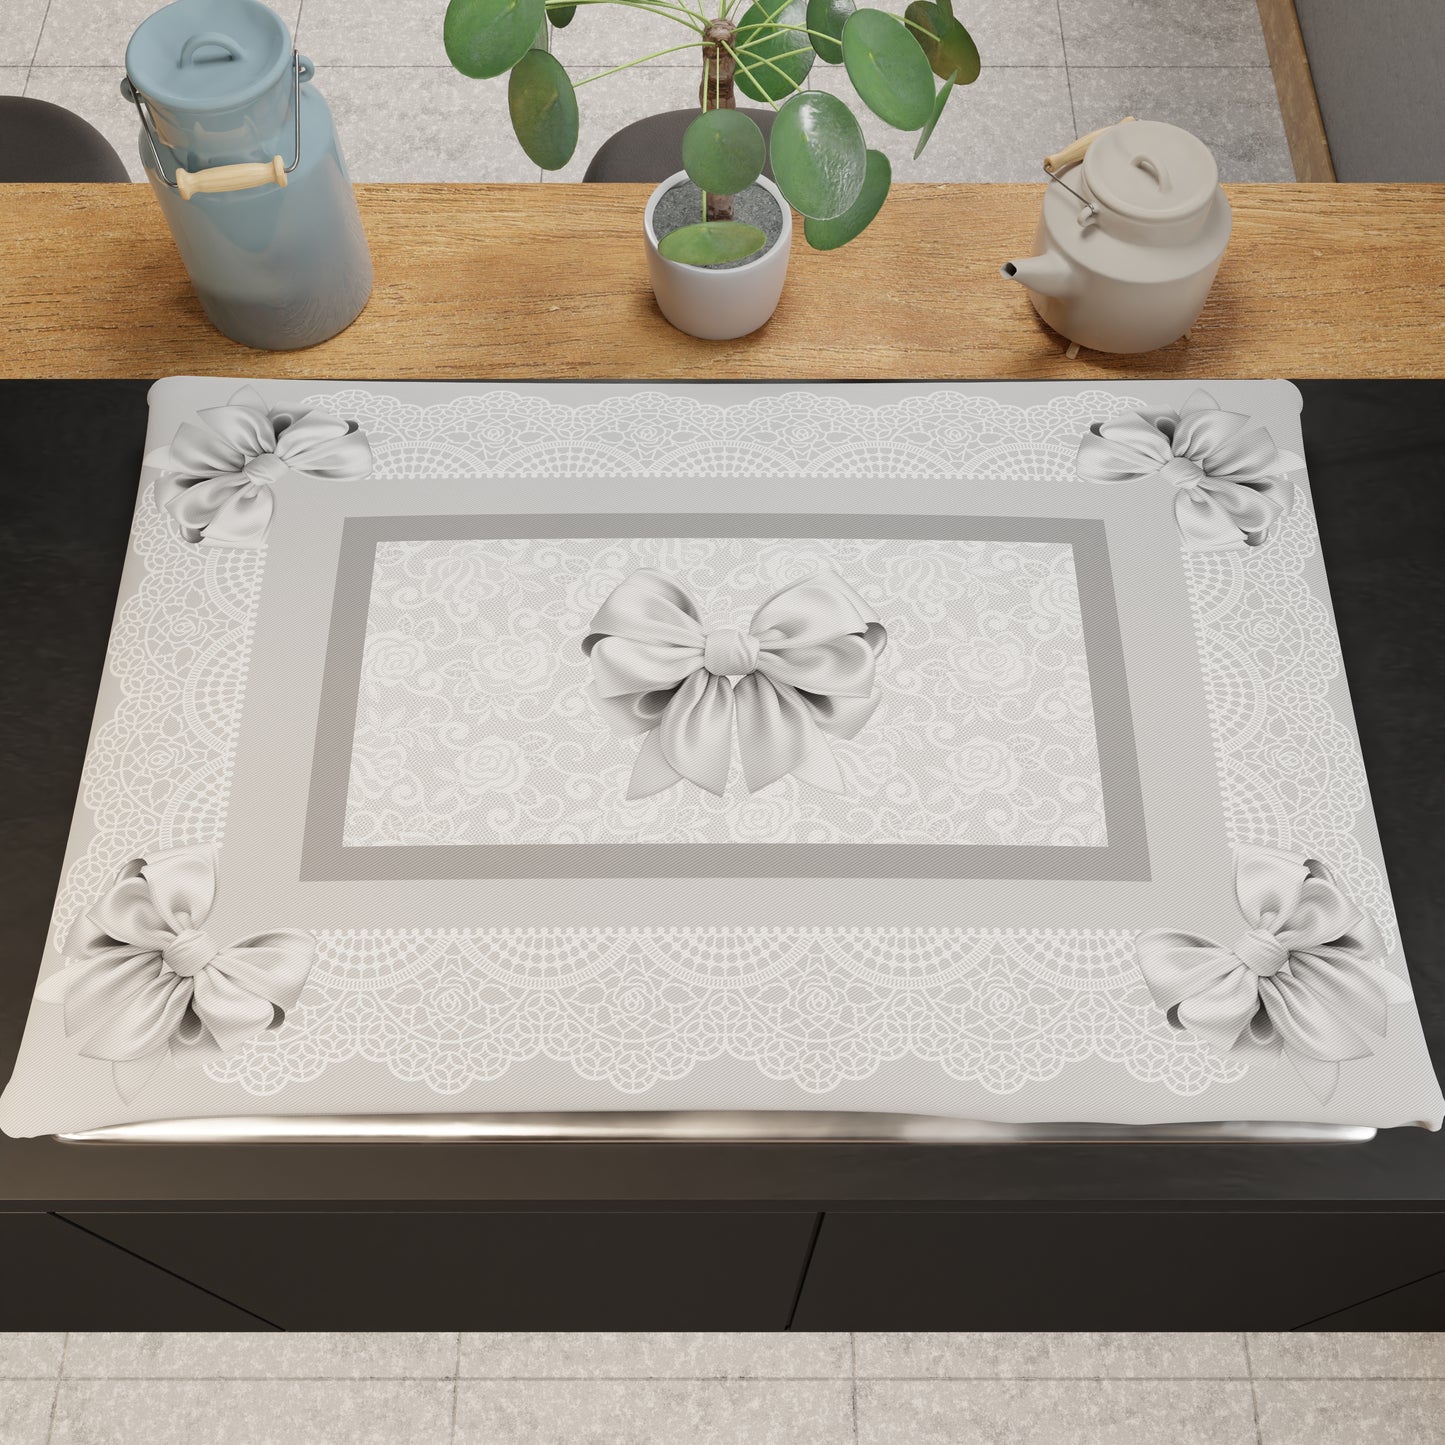 Stove Cover Kitchen Cover in Digital Print Gray Bow 1pc 46x70cm